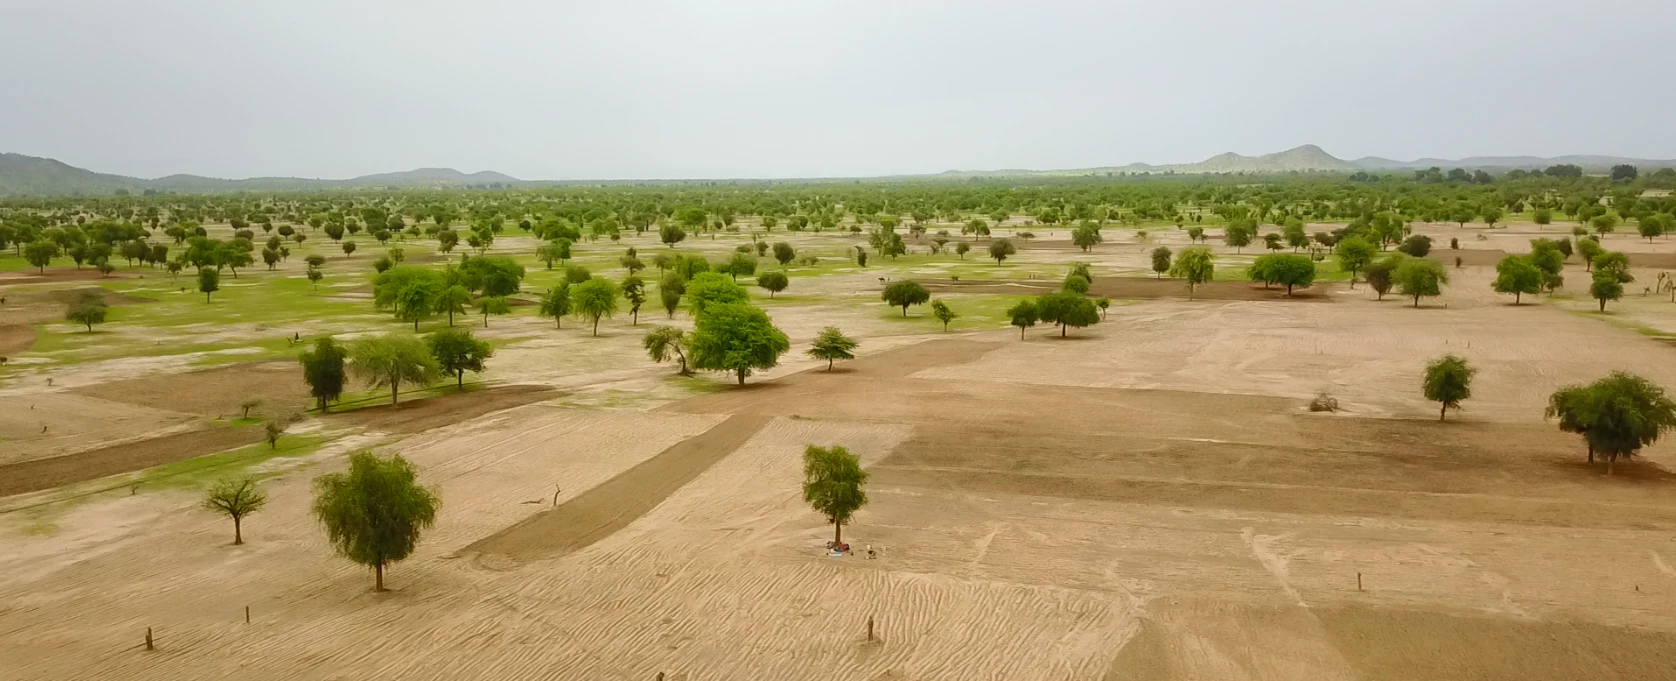 Landscape aerial of rural Chad